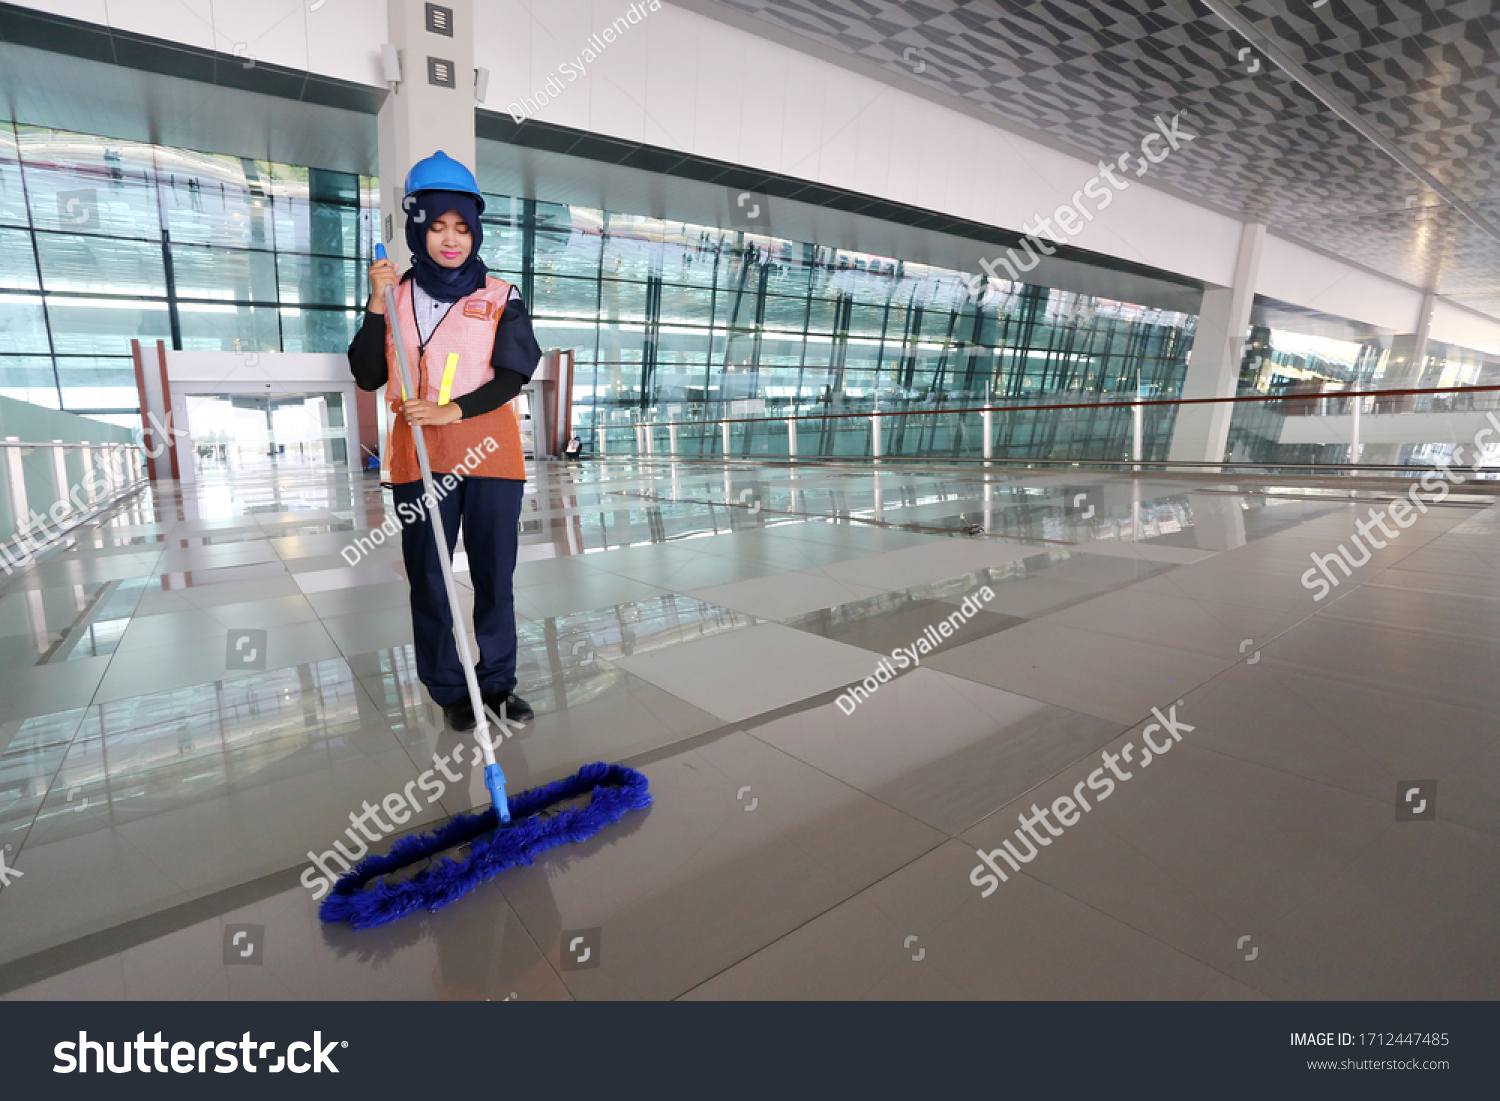 Tangerang, West Java / Indonesia : July 2, 2016 : Cleaning services at Terminal 3 Ultimate Soekarno Hatta Airport #1712447485